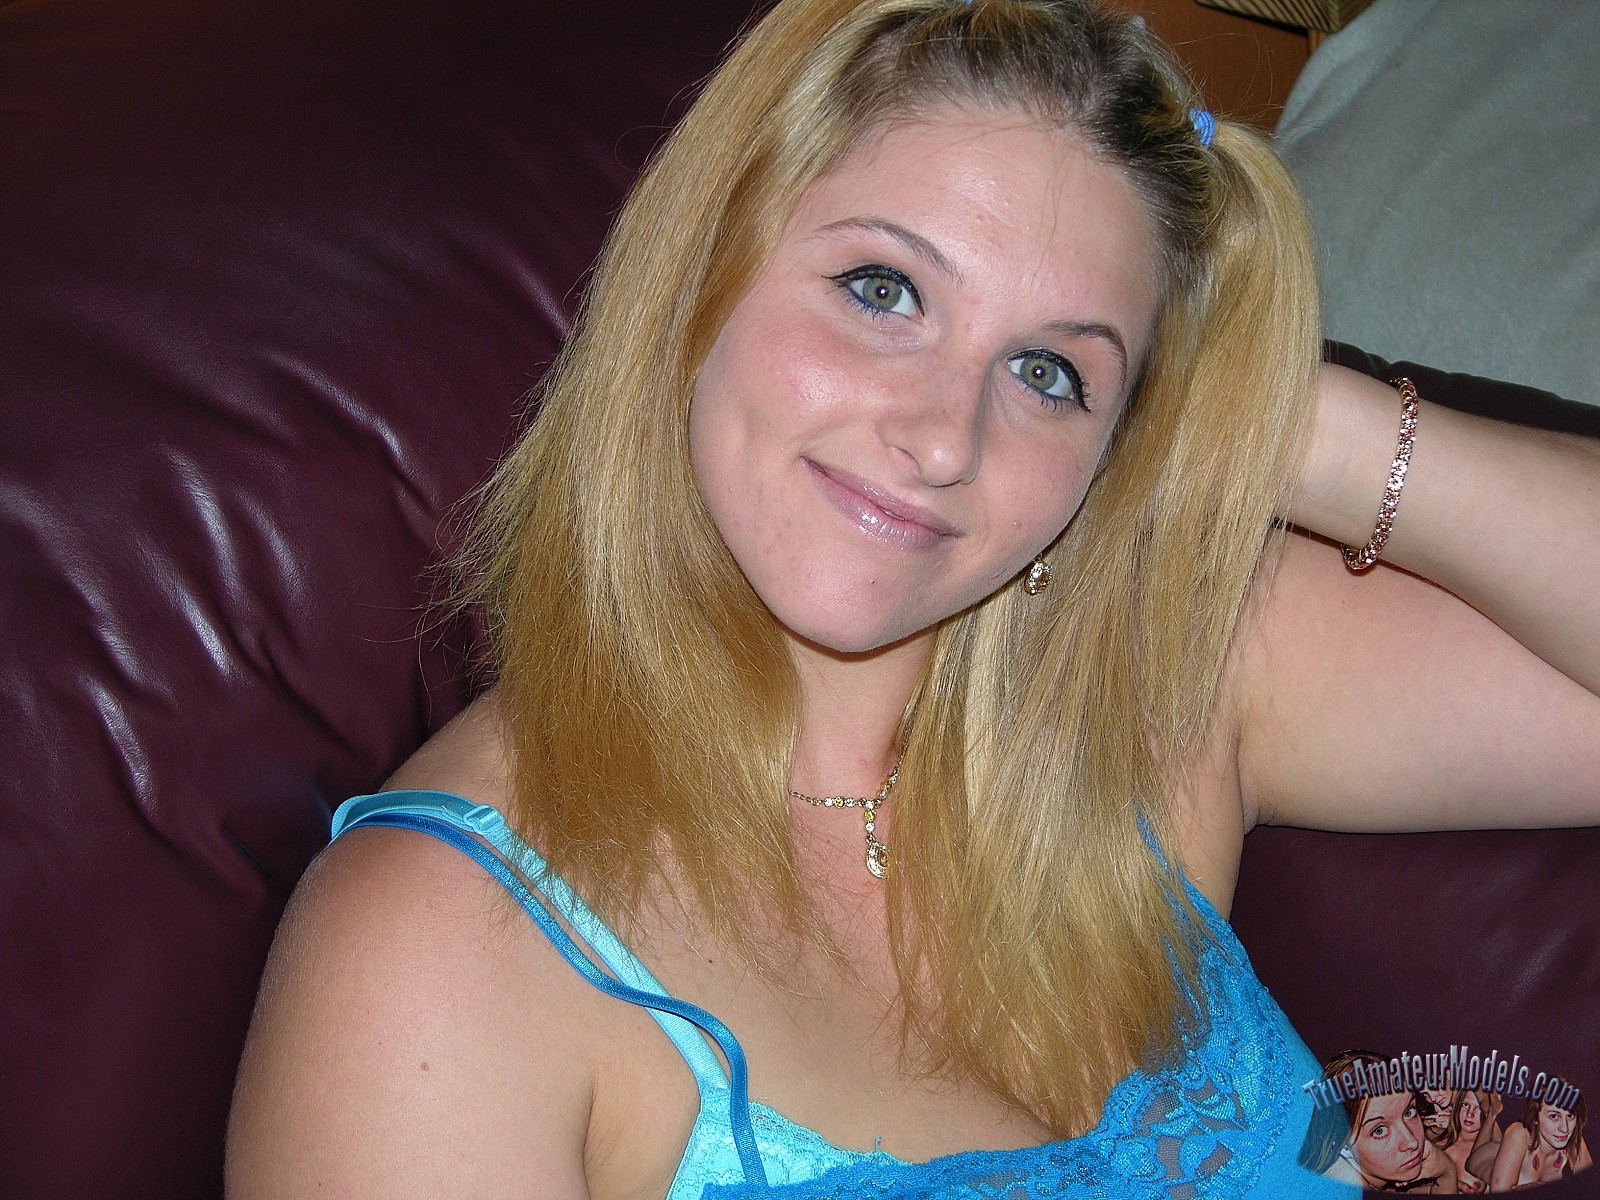 Big Breasted Blonde Amateur Girl 115346 photo pic picture